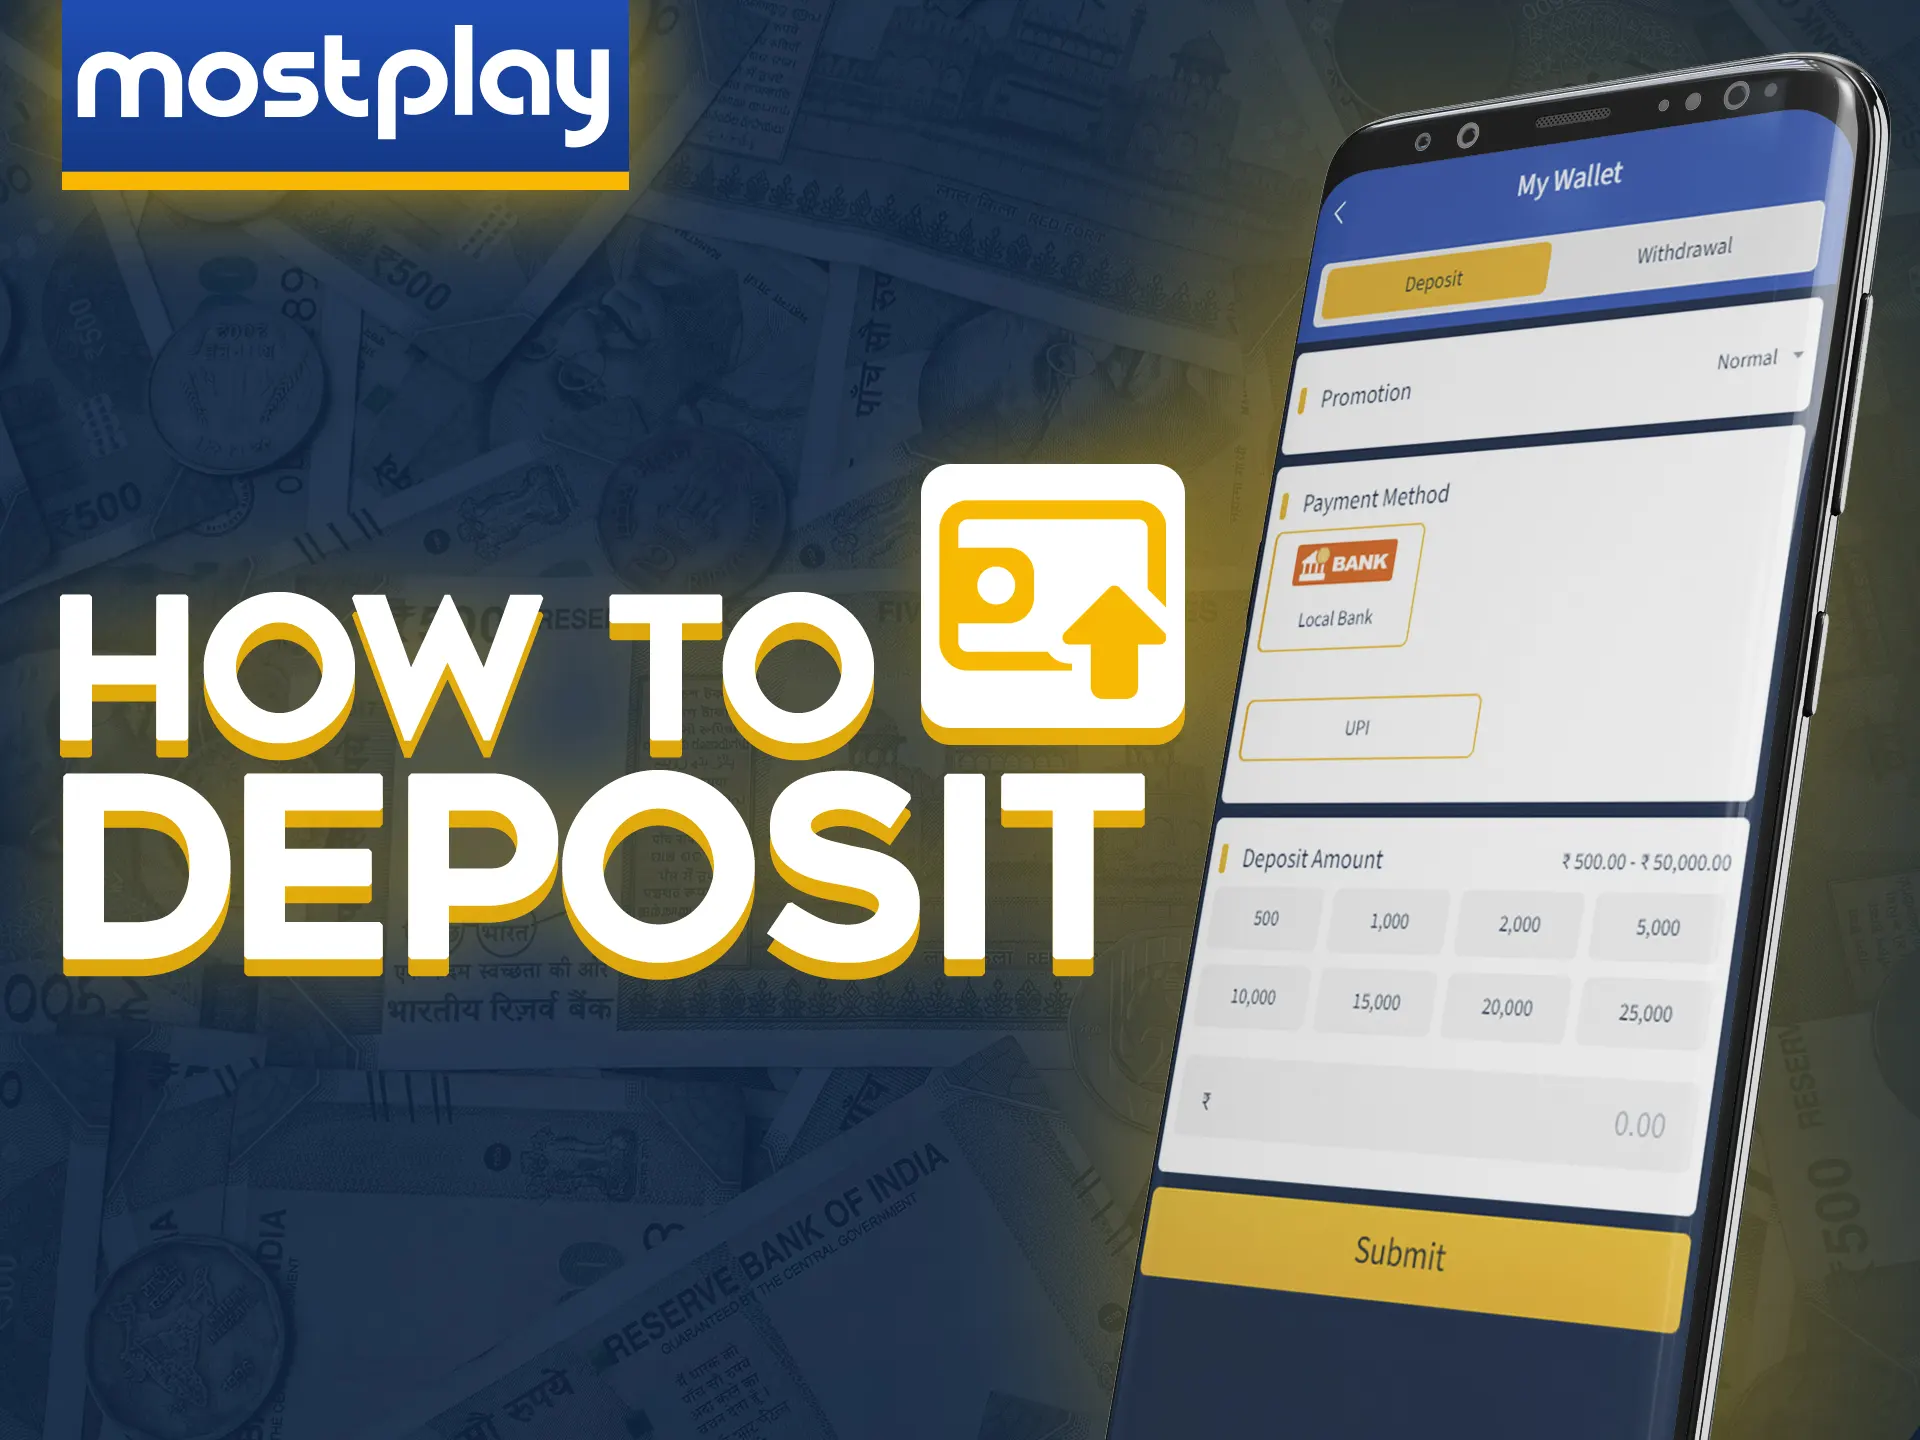 Click on the deposit button and make a deposit at Mostplay.